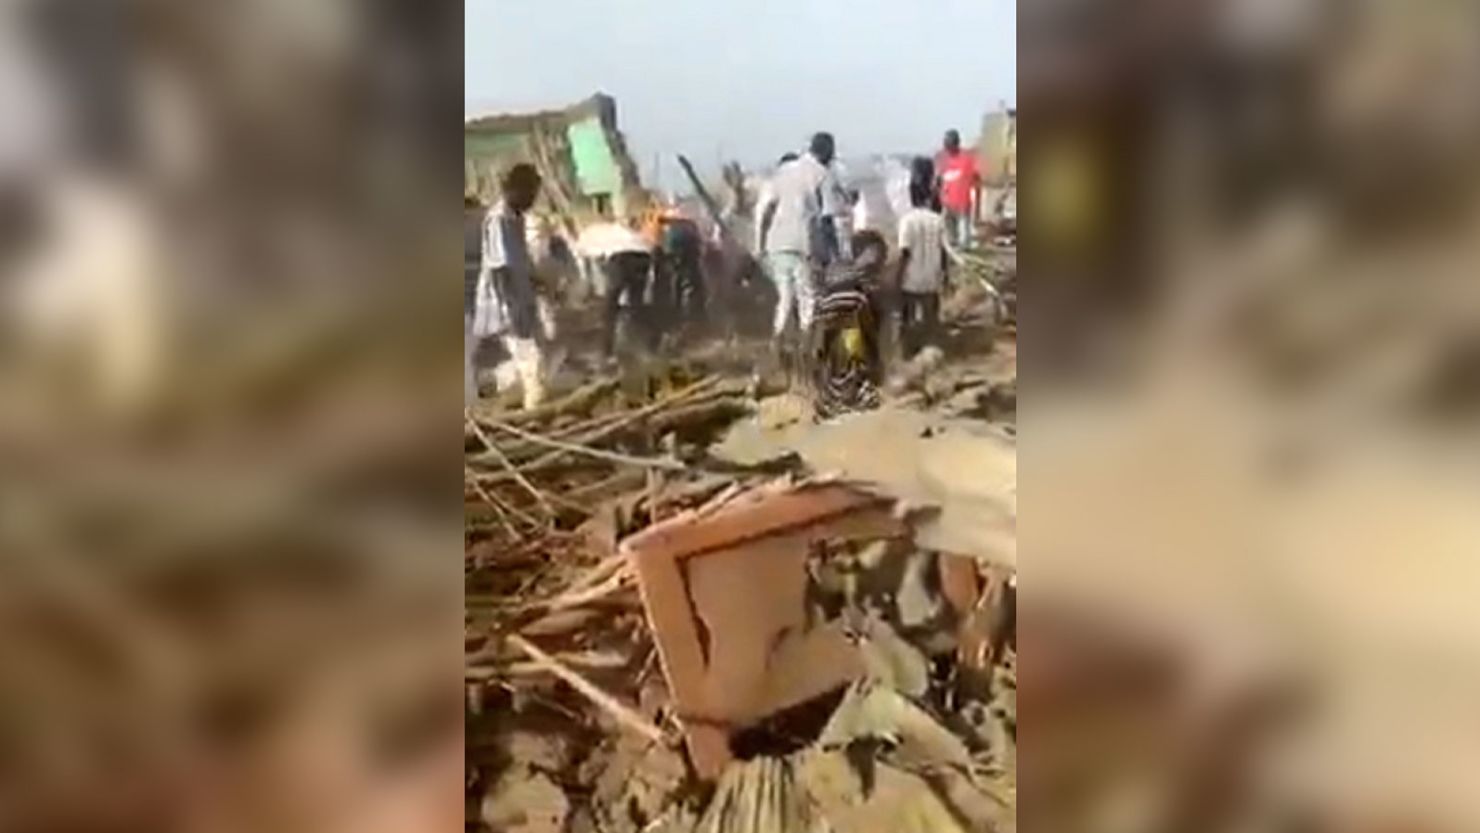 A still from a video shared by Sudan's health ministry shows the aftermath of an airstrike that killed 17 people, including five children, Saturday.